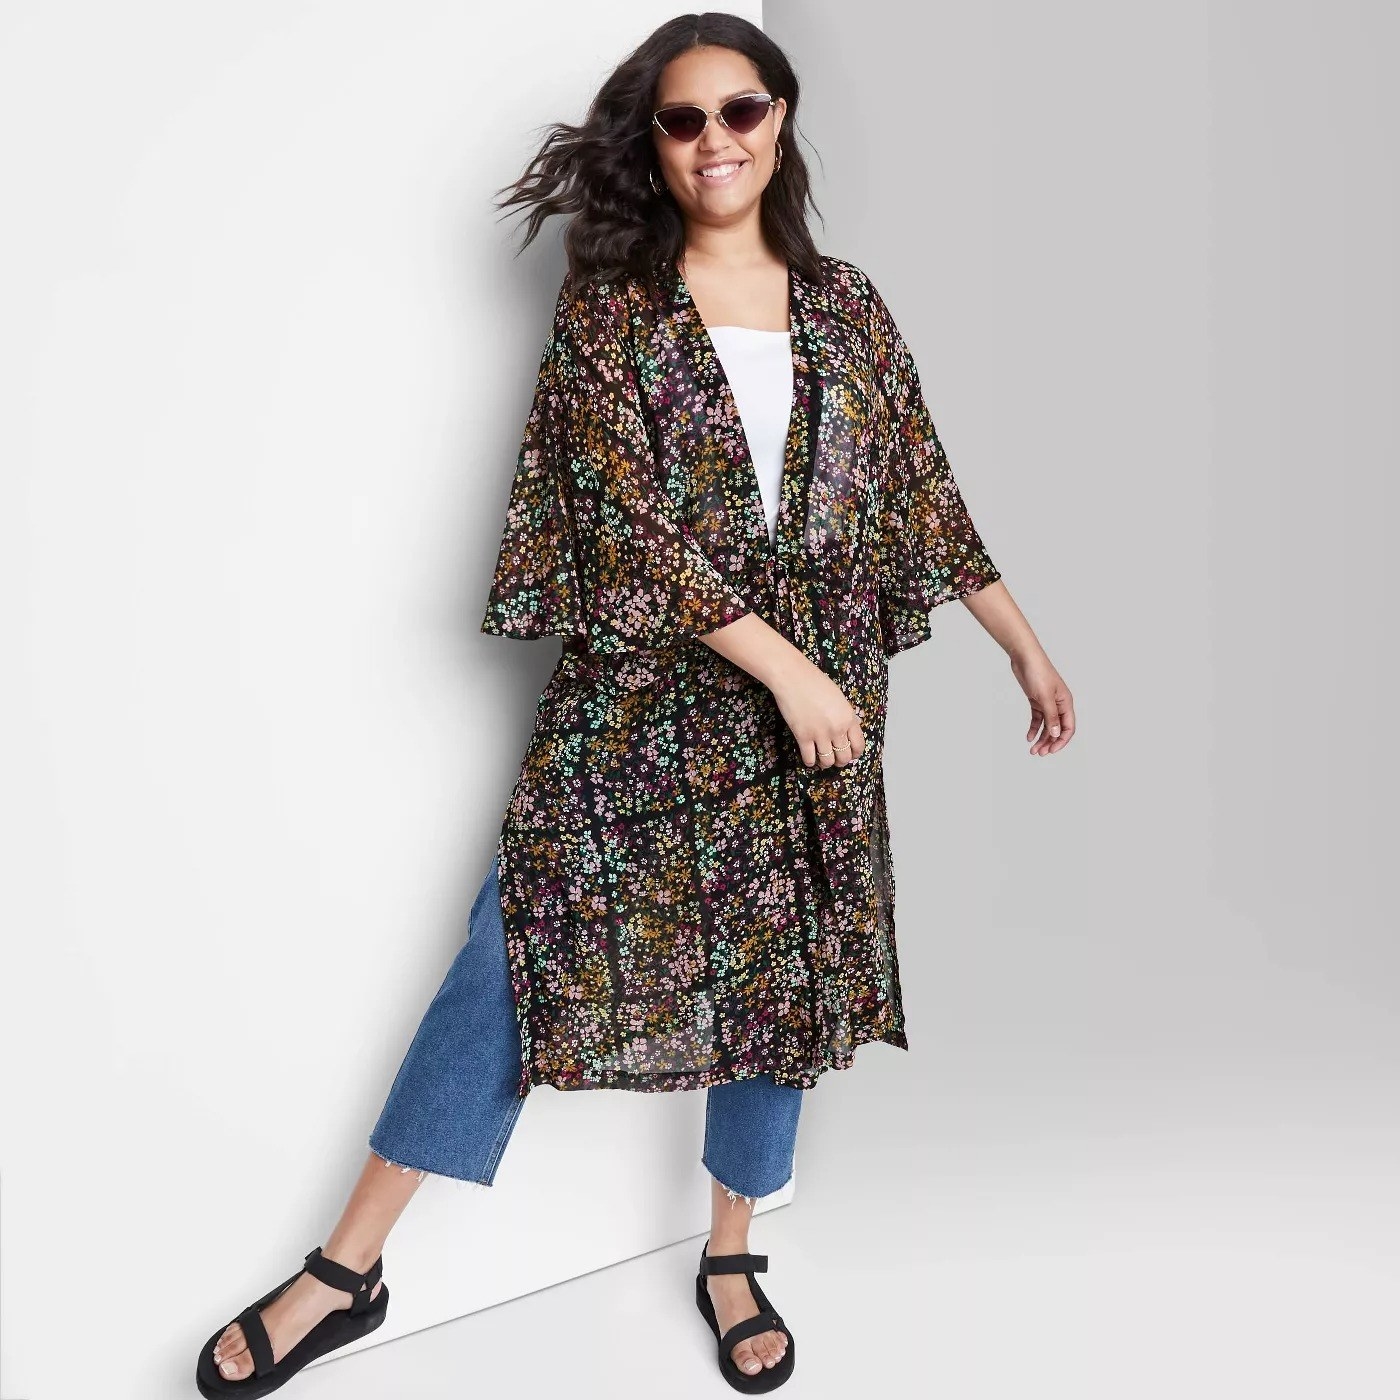 Model wearing long sleeve floral duster, stop at the knees